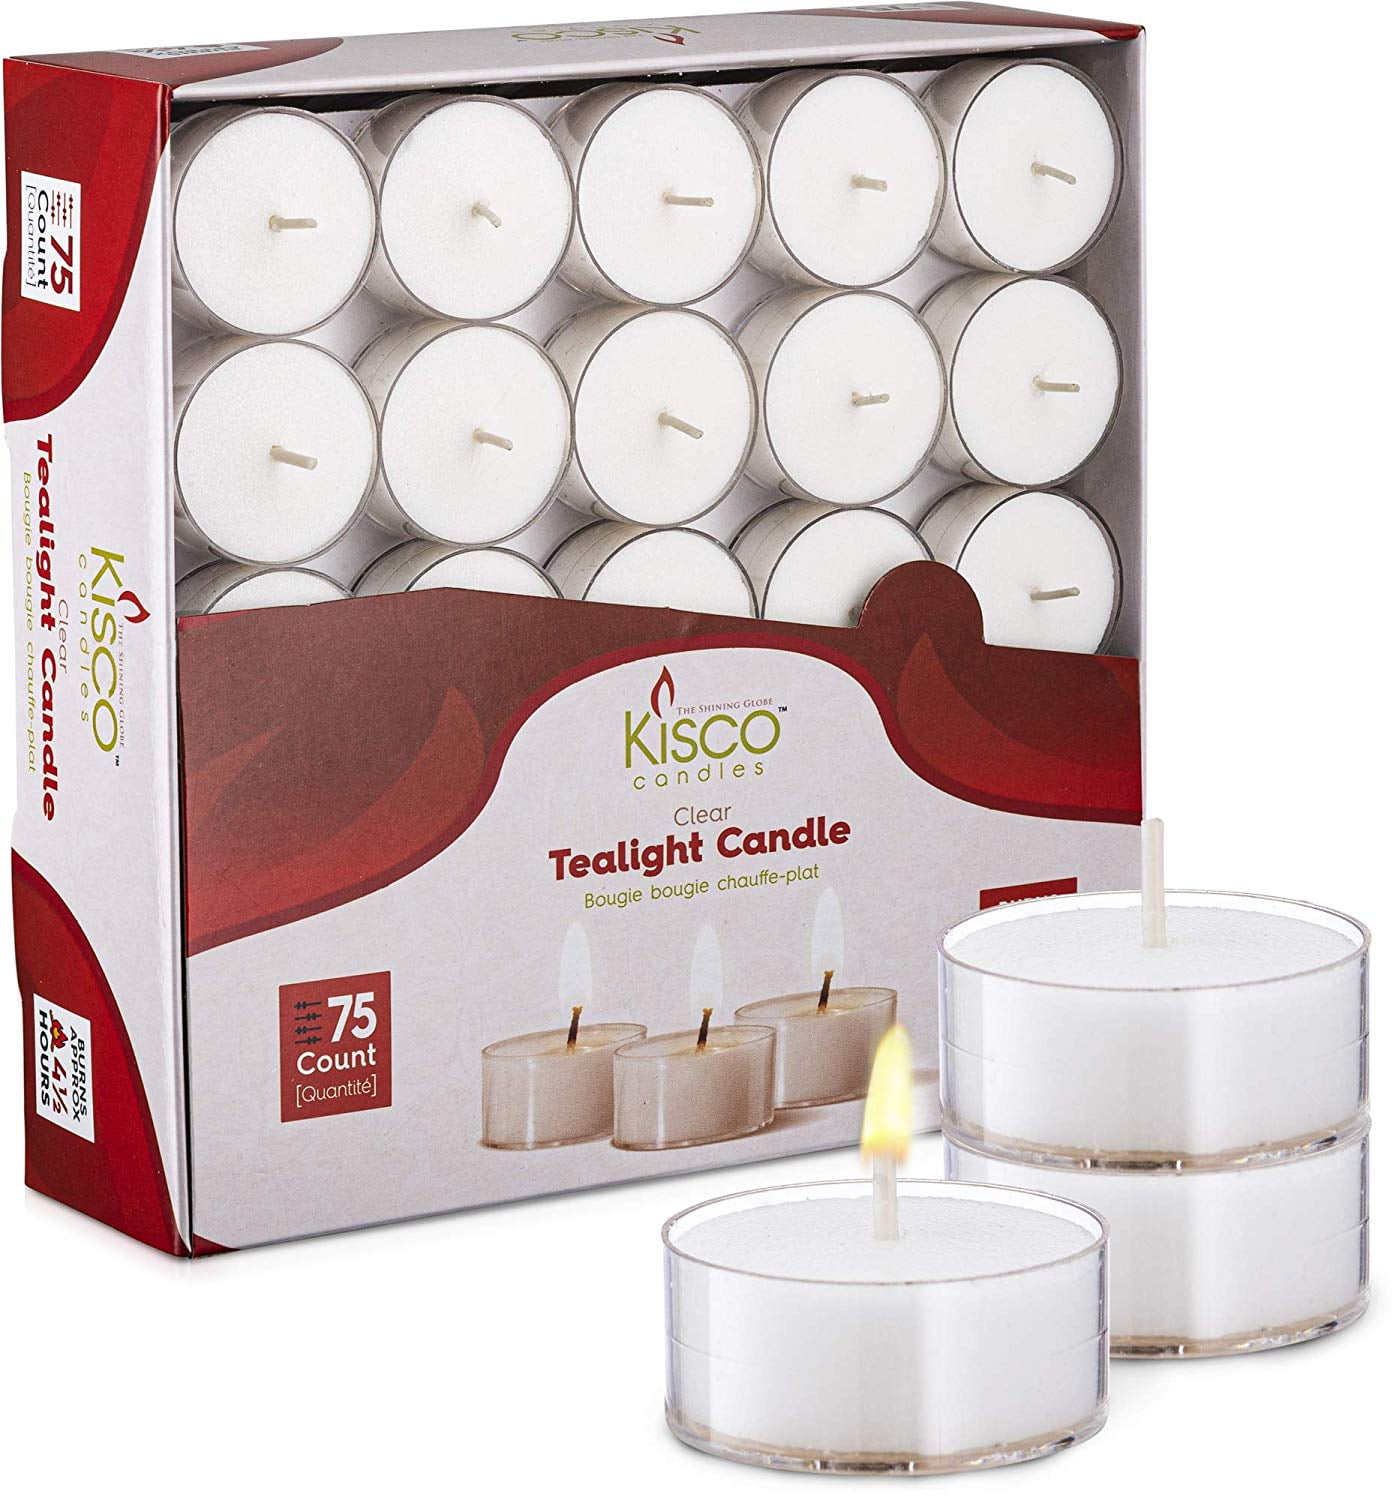 NEW** HUGE MAXI SOY TEA LIGHT CANDLES Unscented Elegant for Wedding Tablescapes 